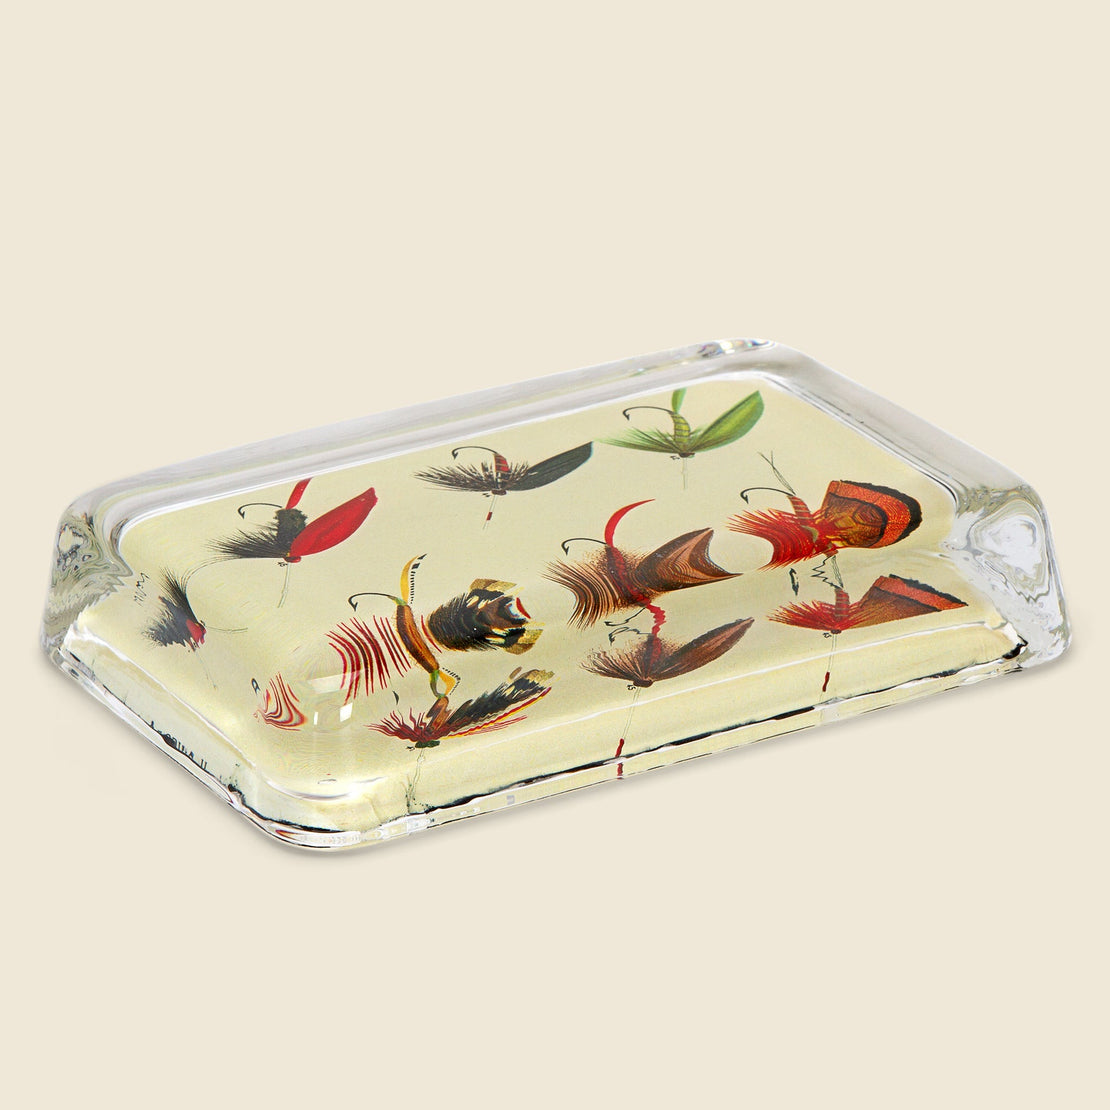 Lake Flies Paperweight - John Derian - STAG Provisions - Home - Art & Accessories - Decorative Object